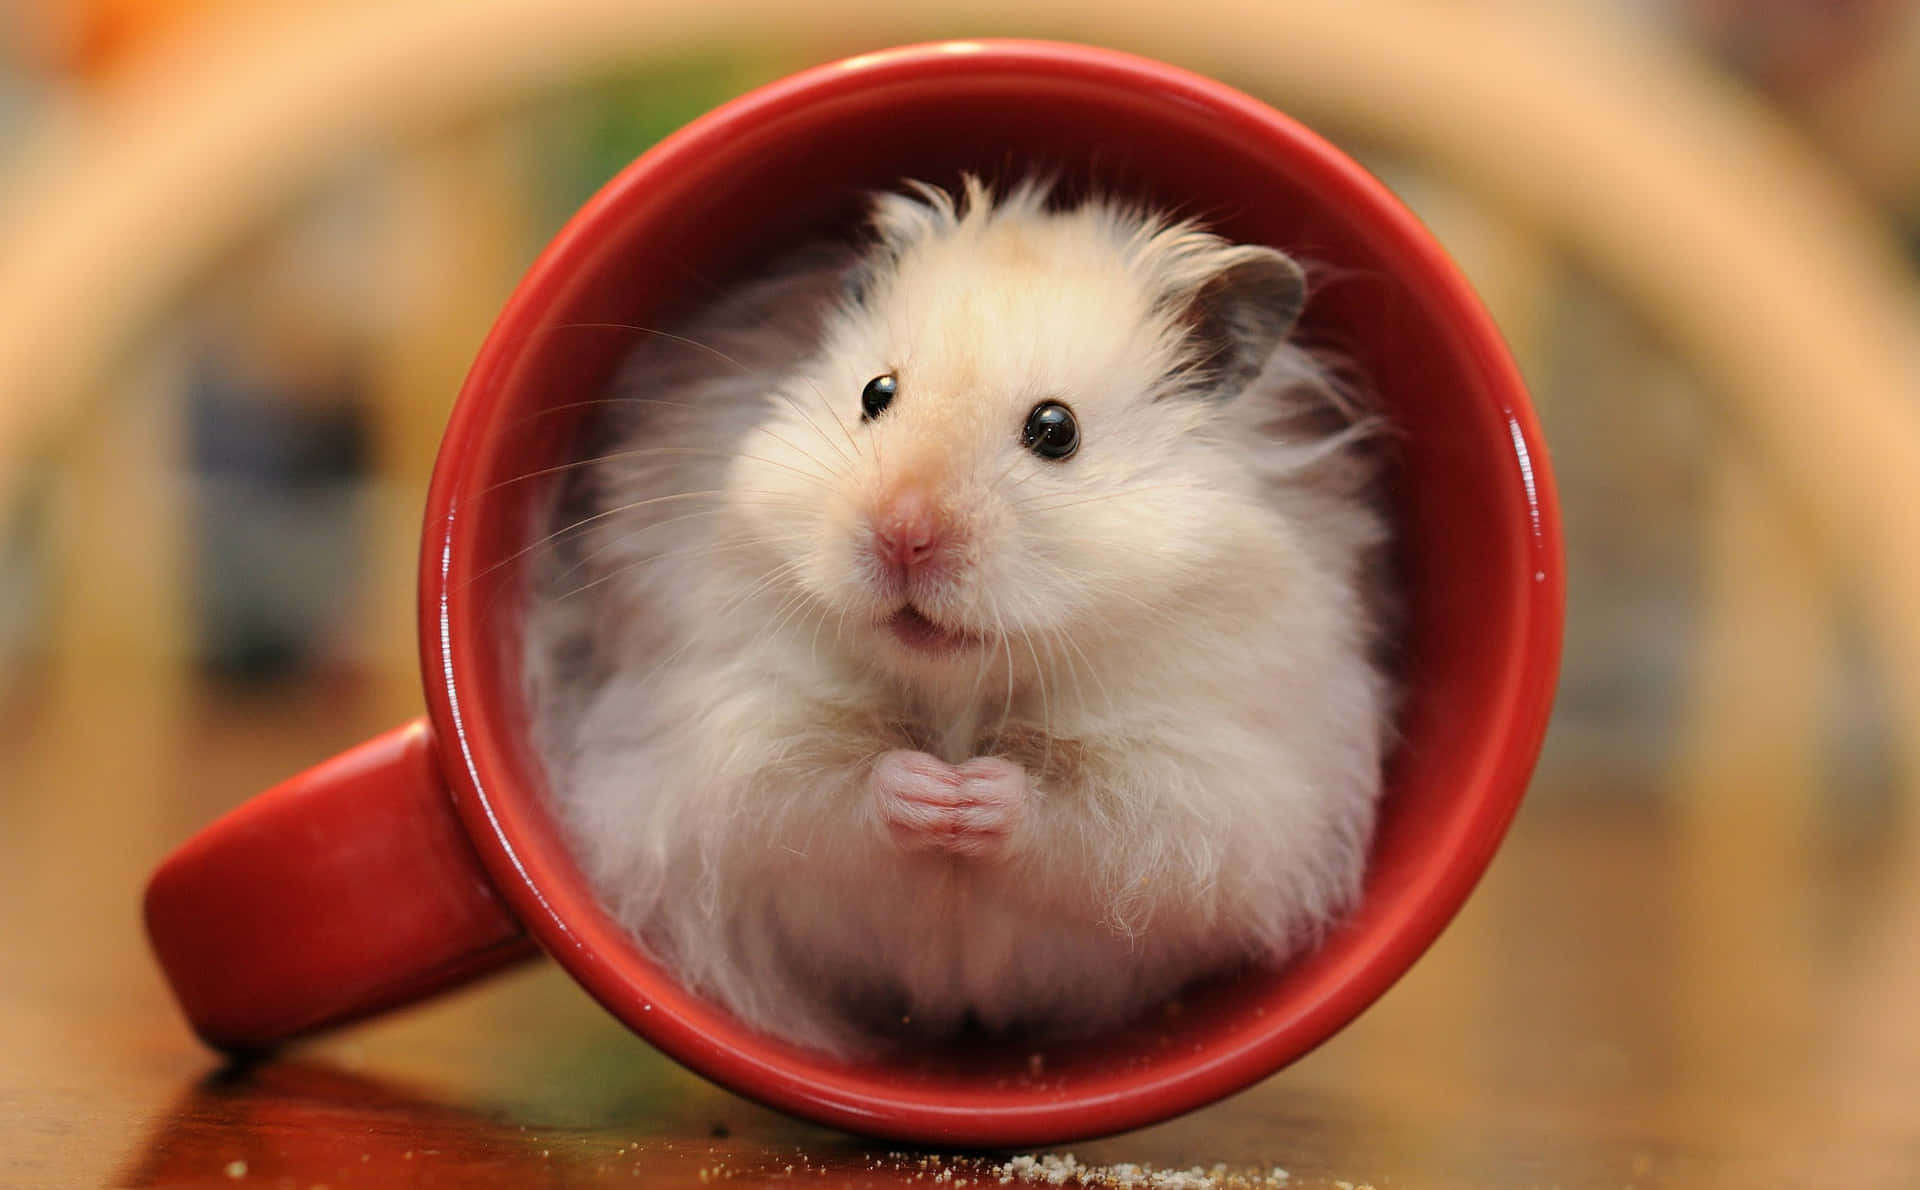 "Cute and Cuddly Hamster" Wallpaper